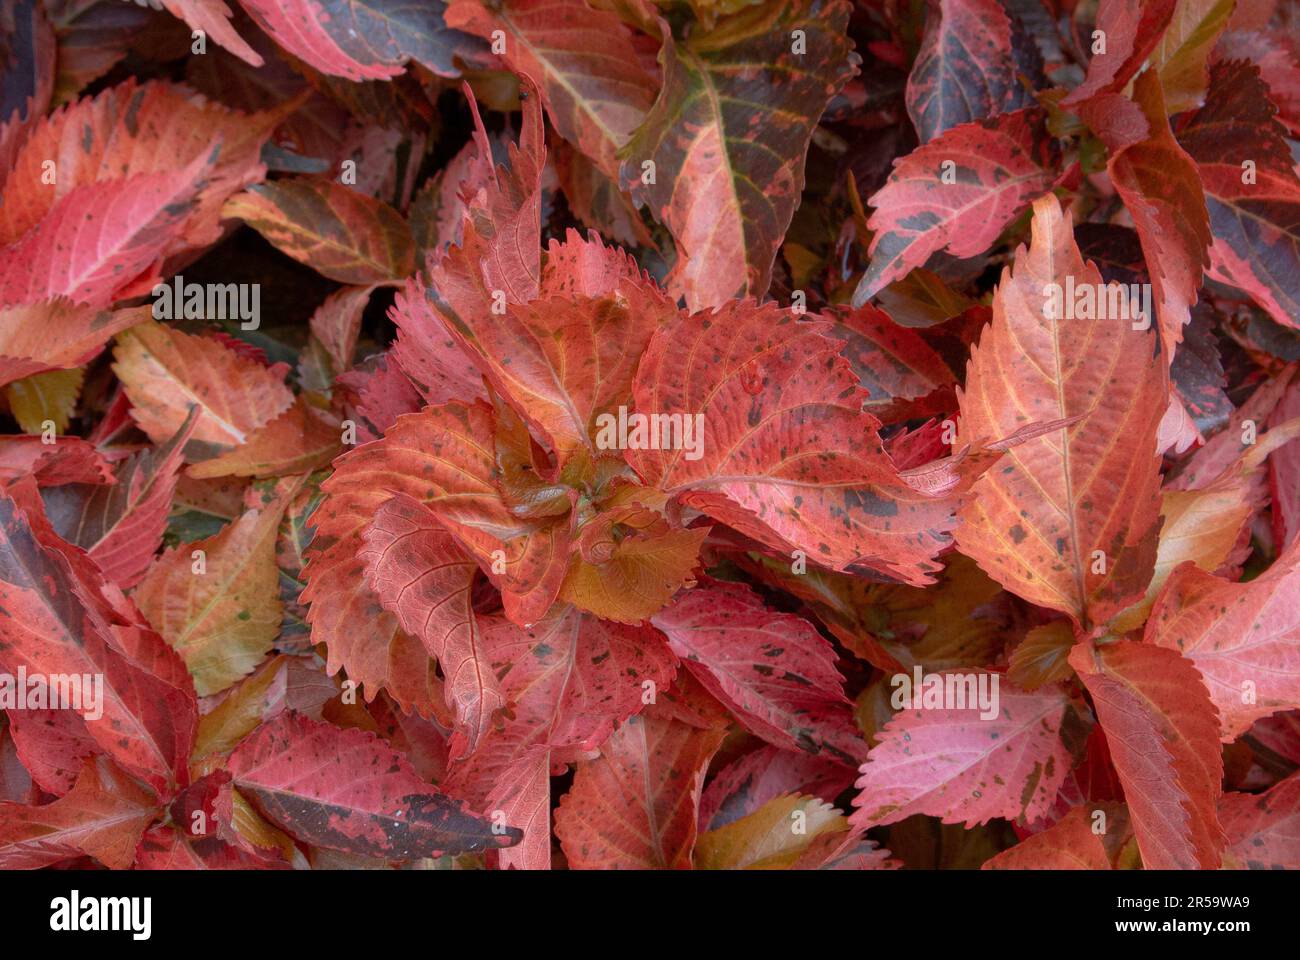 Vivid color of Acalypha Wilkesiana leaves, common names are Copperleaf and Jacob’s Coat. Stock Photo